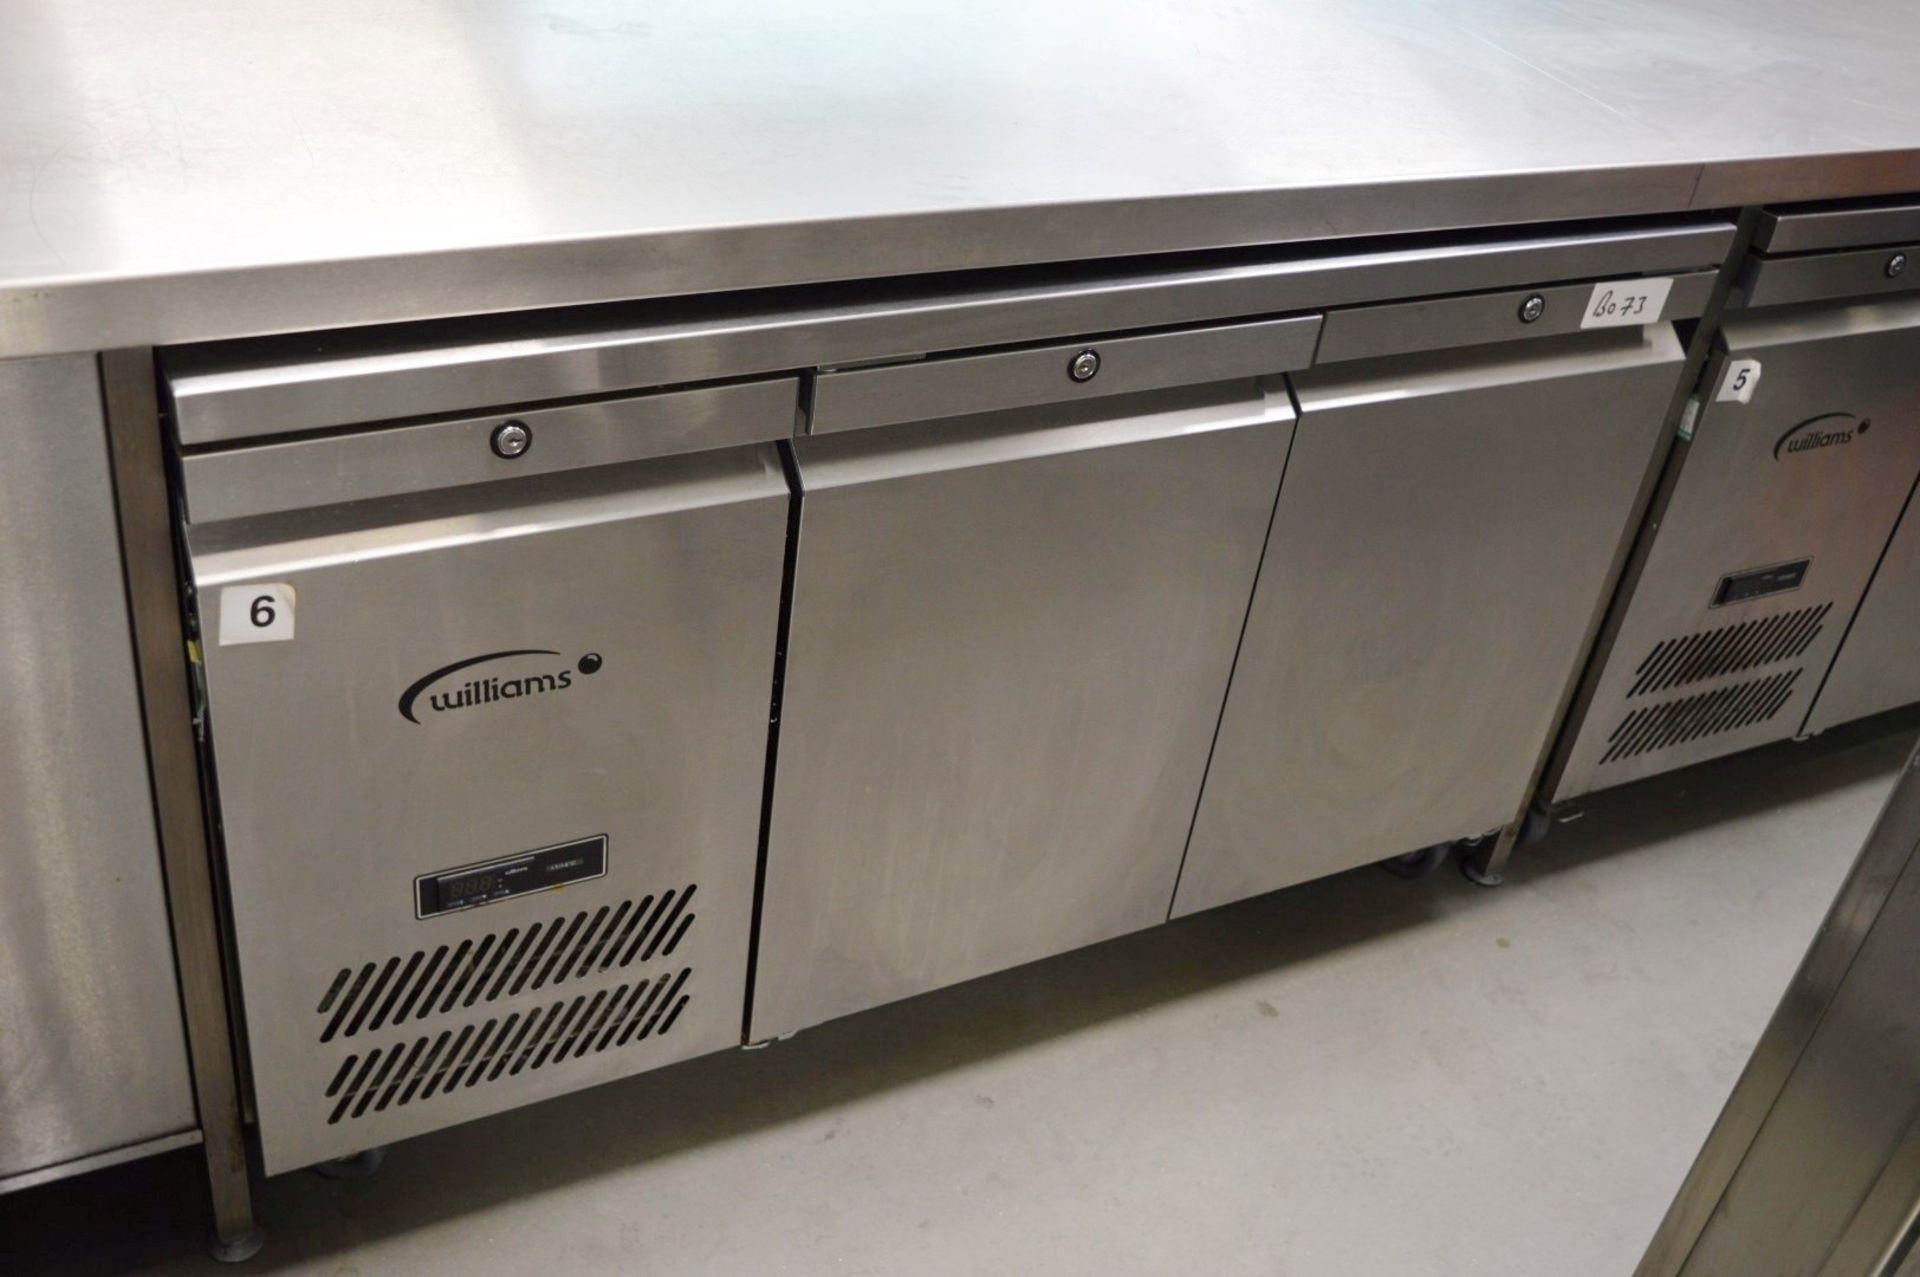 1 x Williams Stainless Steel Refrigerator - CL245 - Location: London EC4M COLLECTIONS: Buyers will